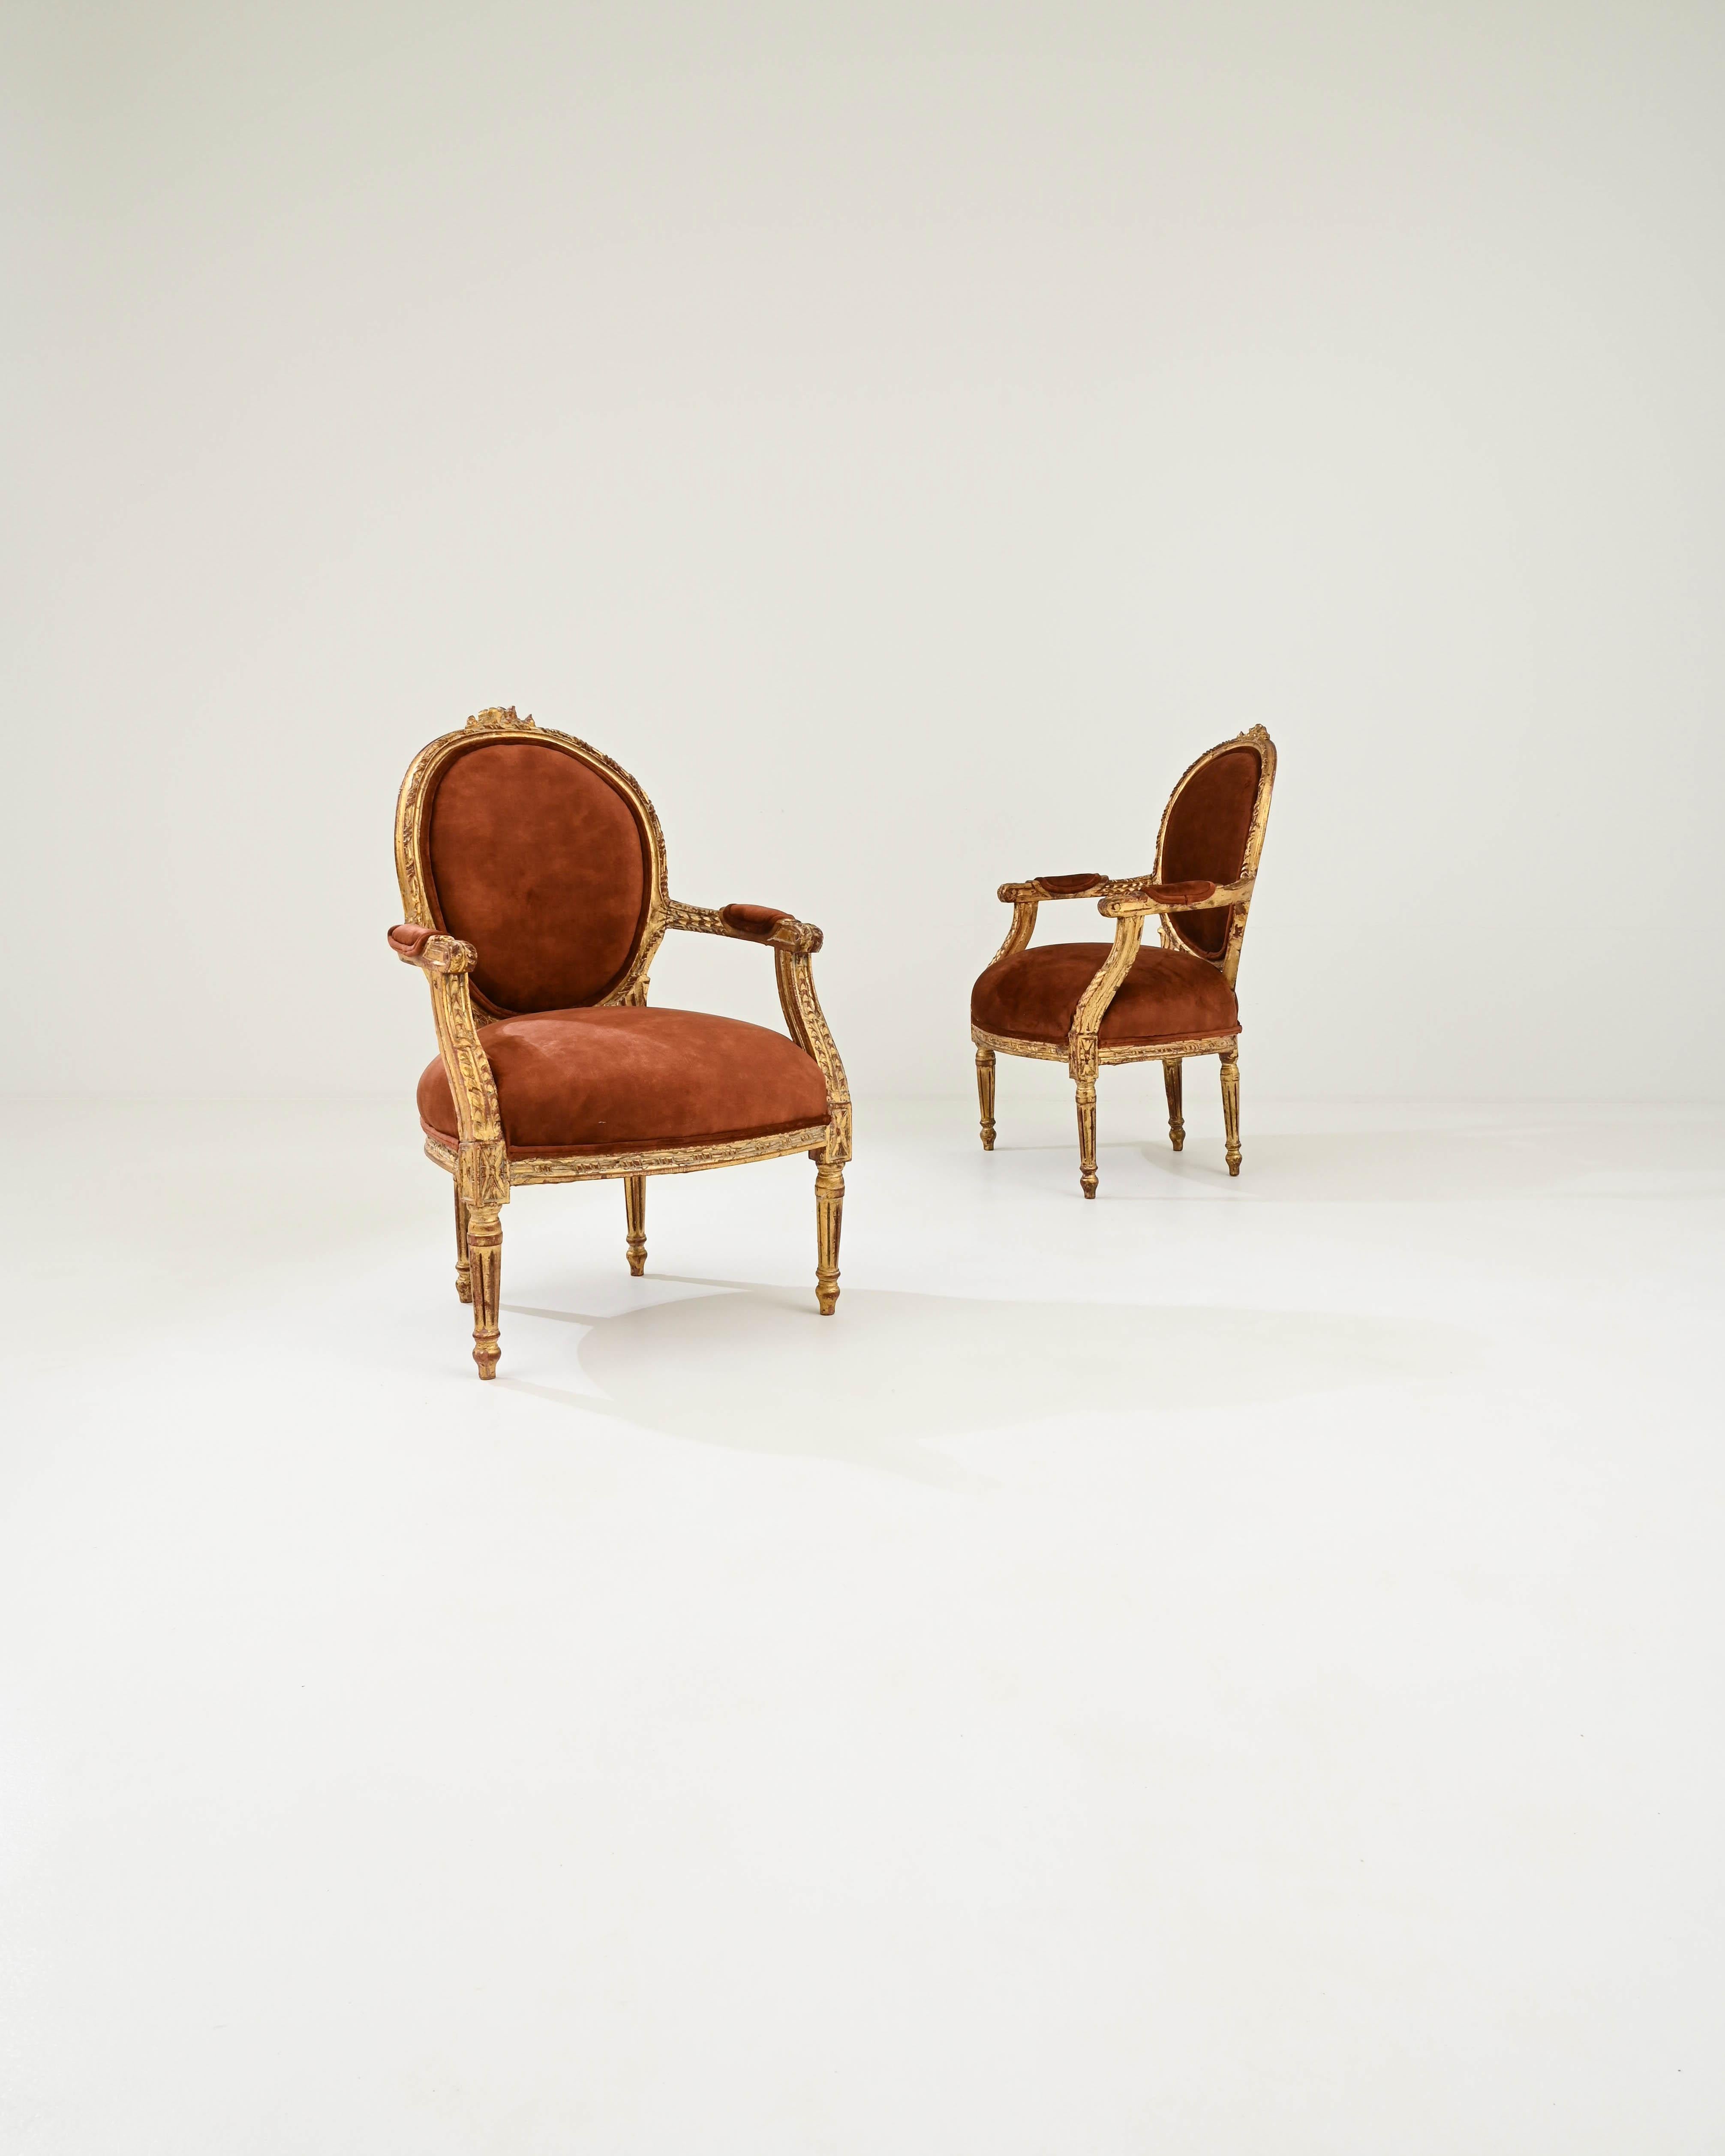 Radiating a pronounced Rococo influence, this exquisite pair of armchairs was handcrafted in 19th-century France. The puffy seats upholstered in high-quality cognac-toned velvet, rest upon ornate wooden bases gilded with gold leaf. From the graceful